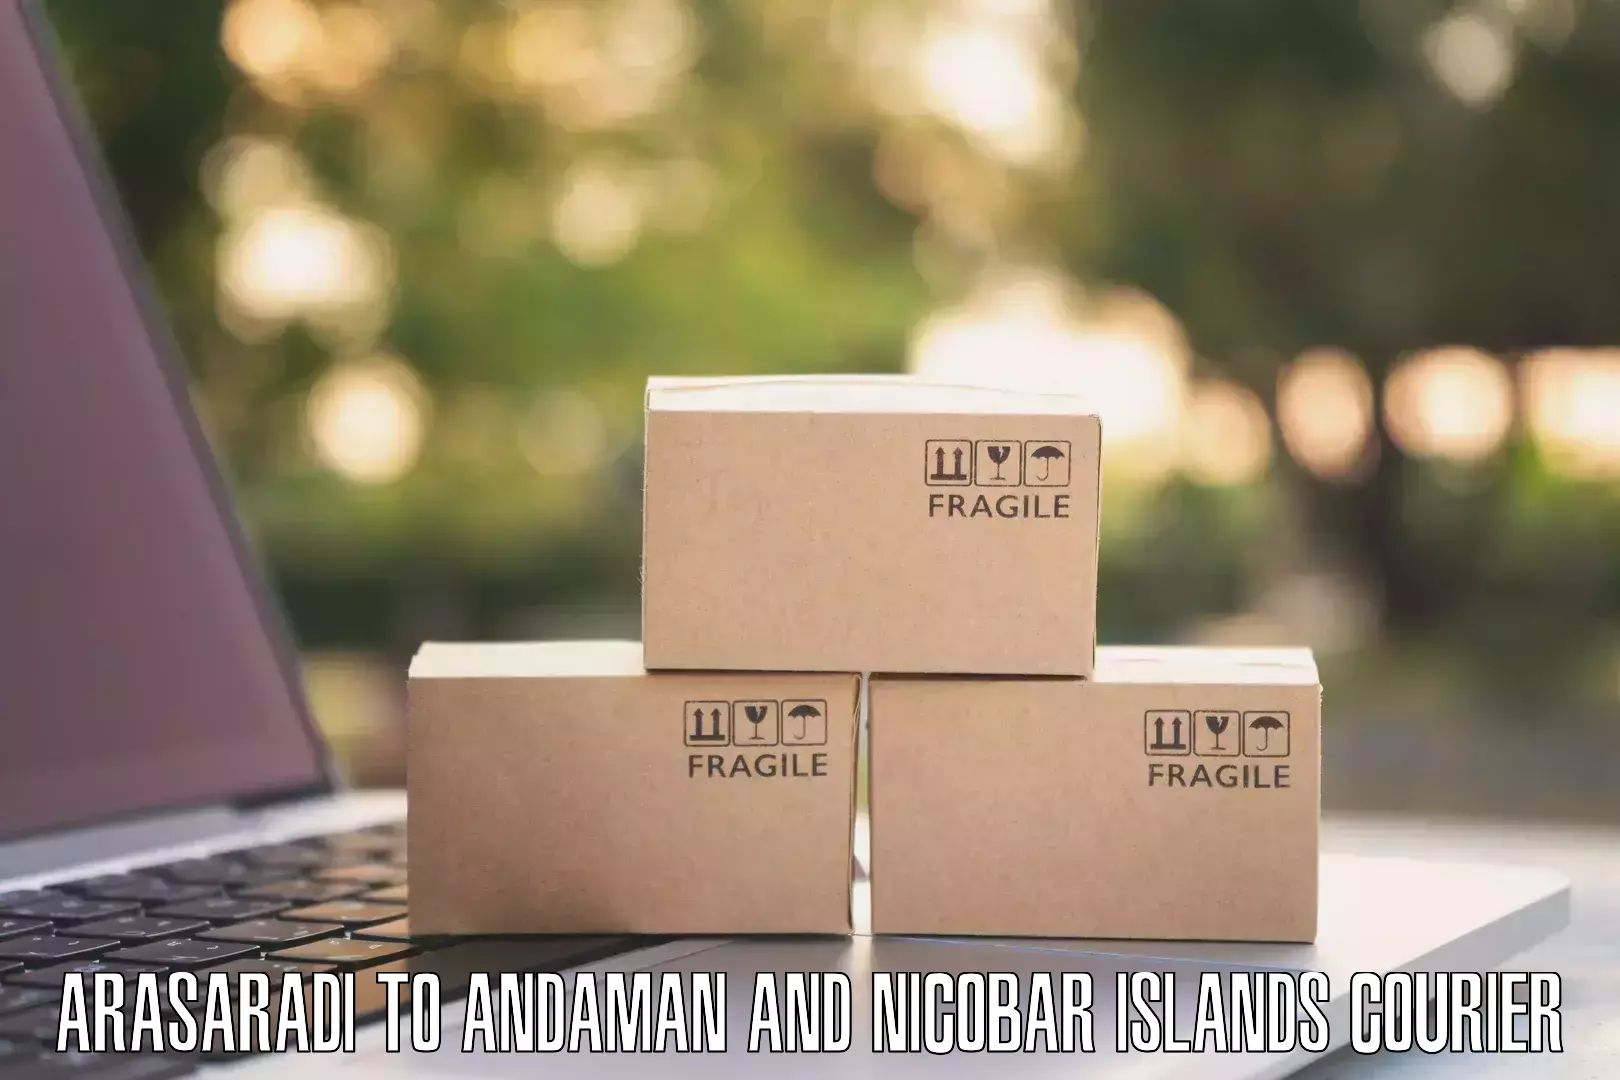 Easy access courier services in Arasaradi to Andaman and Nicobar Islands